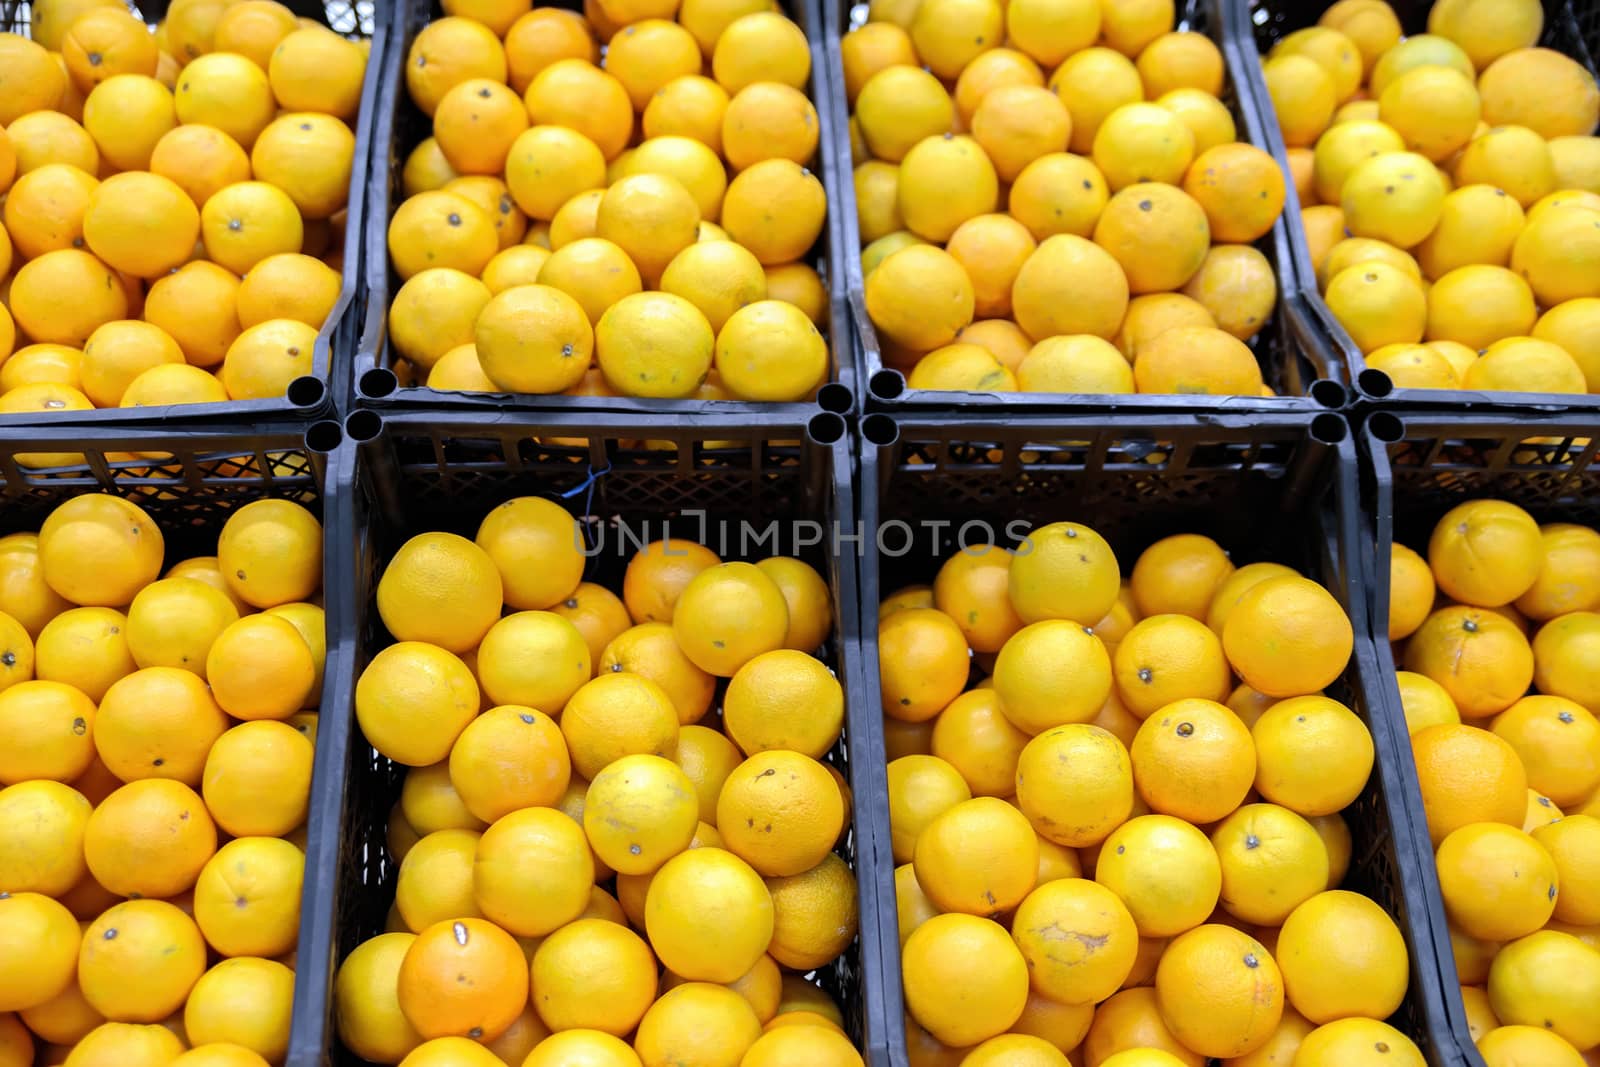 Grapefruit harvest. Background texture: Yellow and orange grapefruit. Grapefruit on a grocery store shelf, close-up. Exotic fruits in the supermarket.